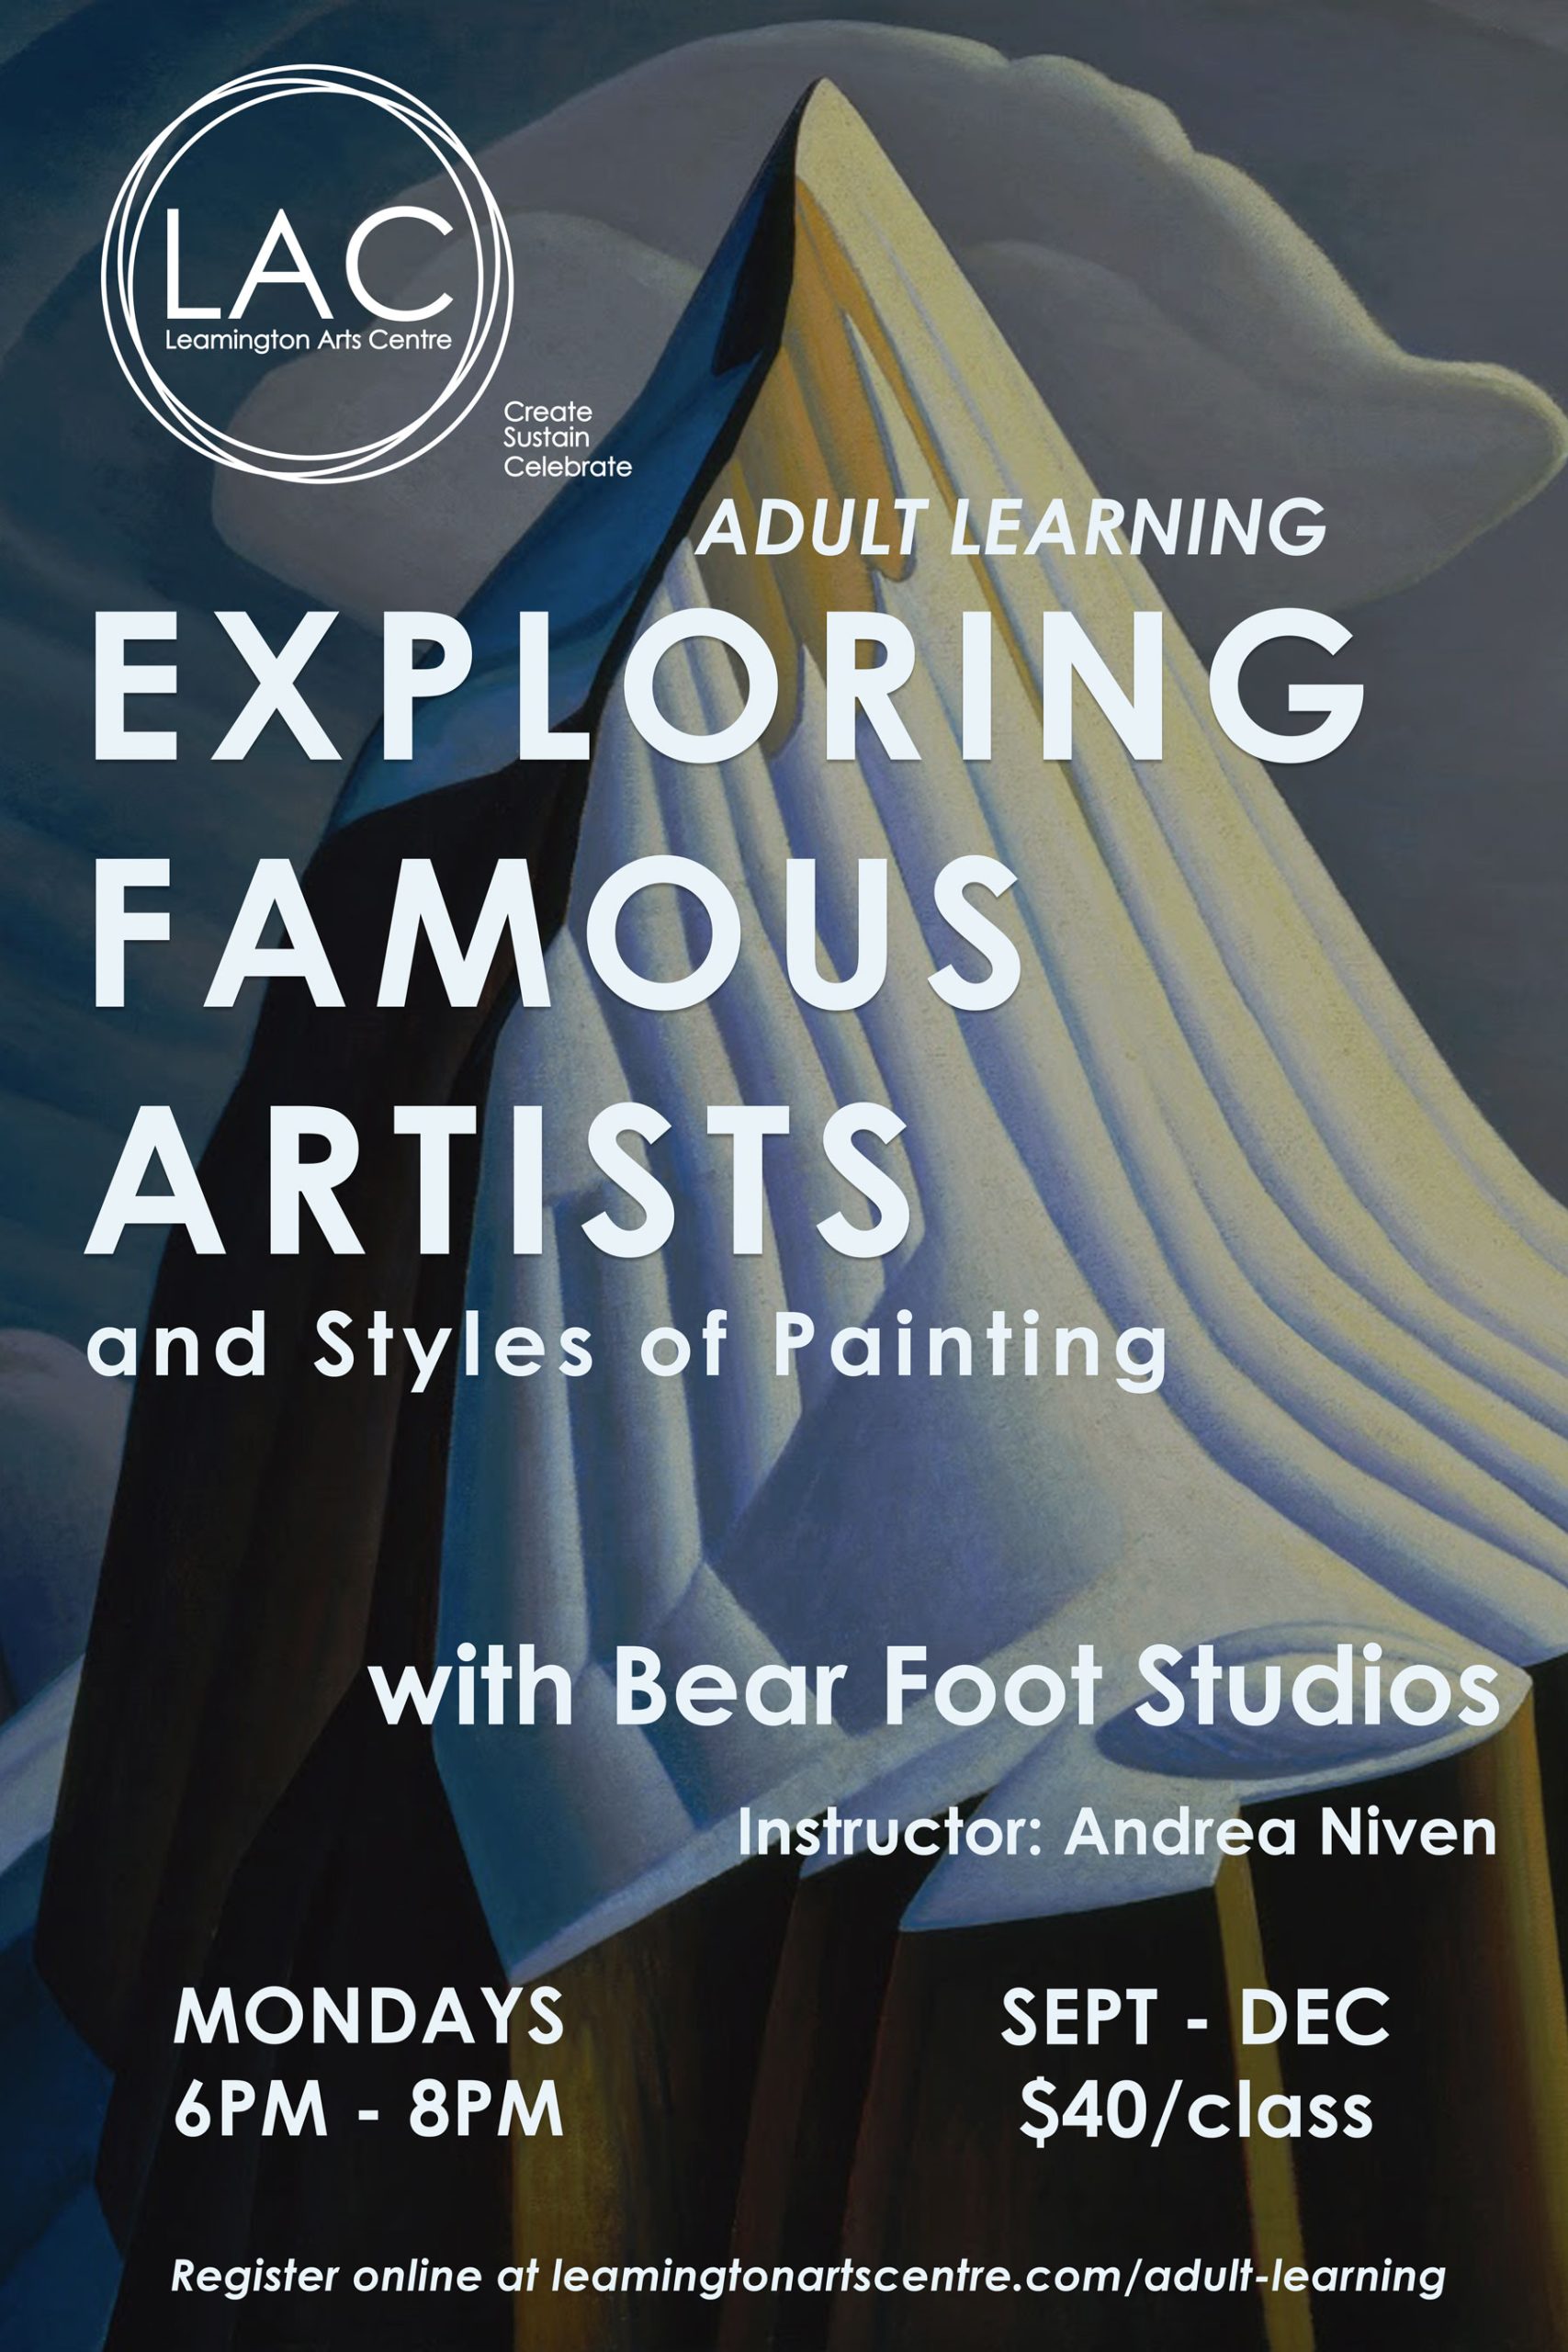 Exploring Famous Artists and Styles of Painting